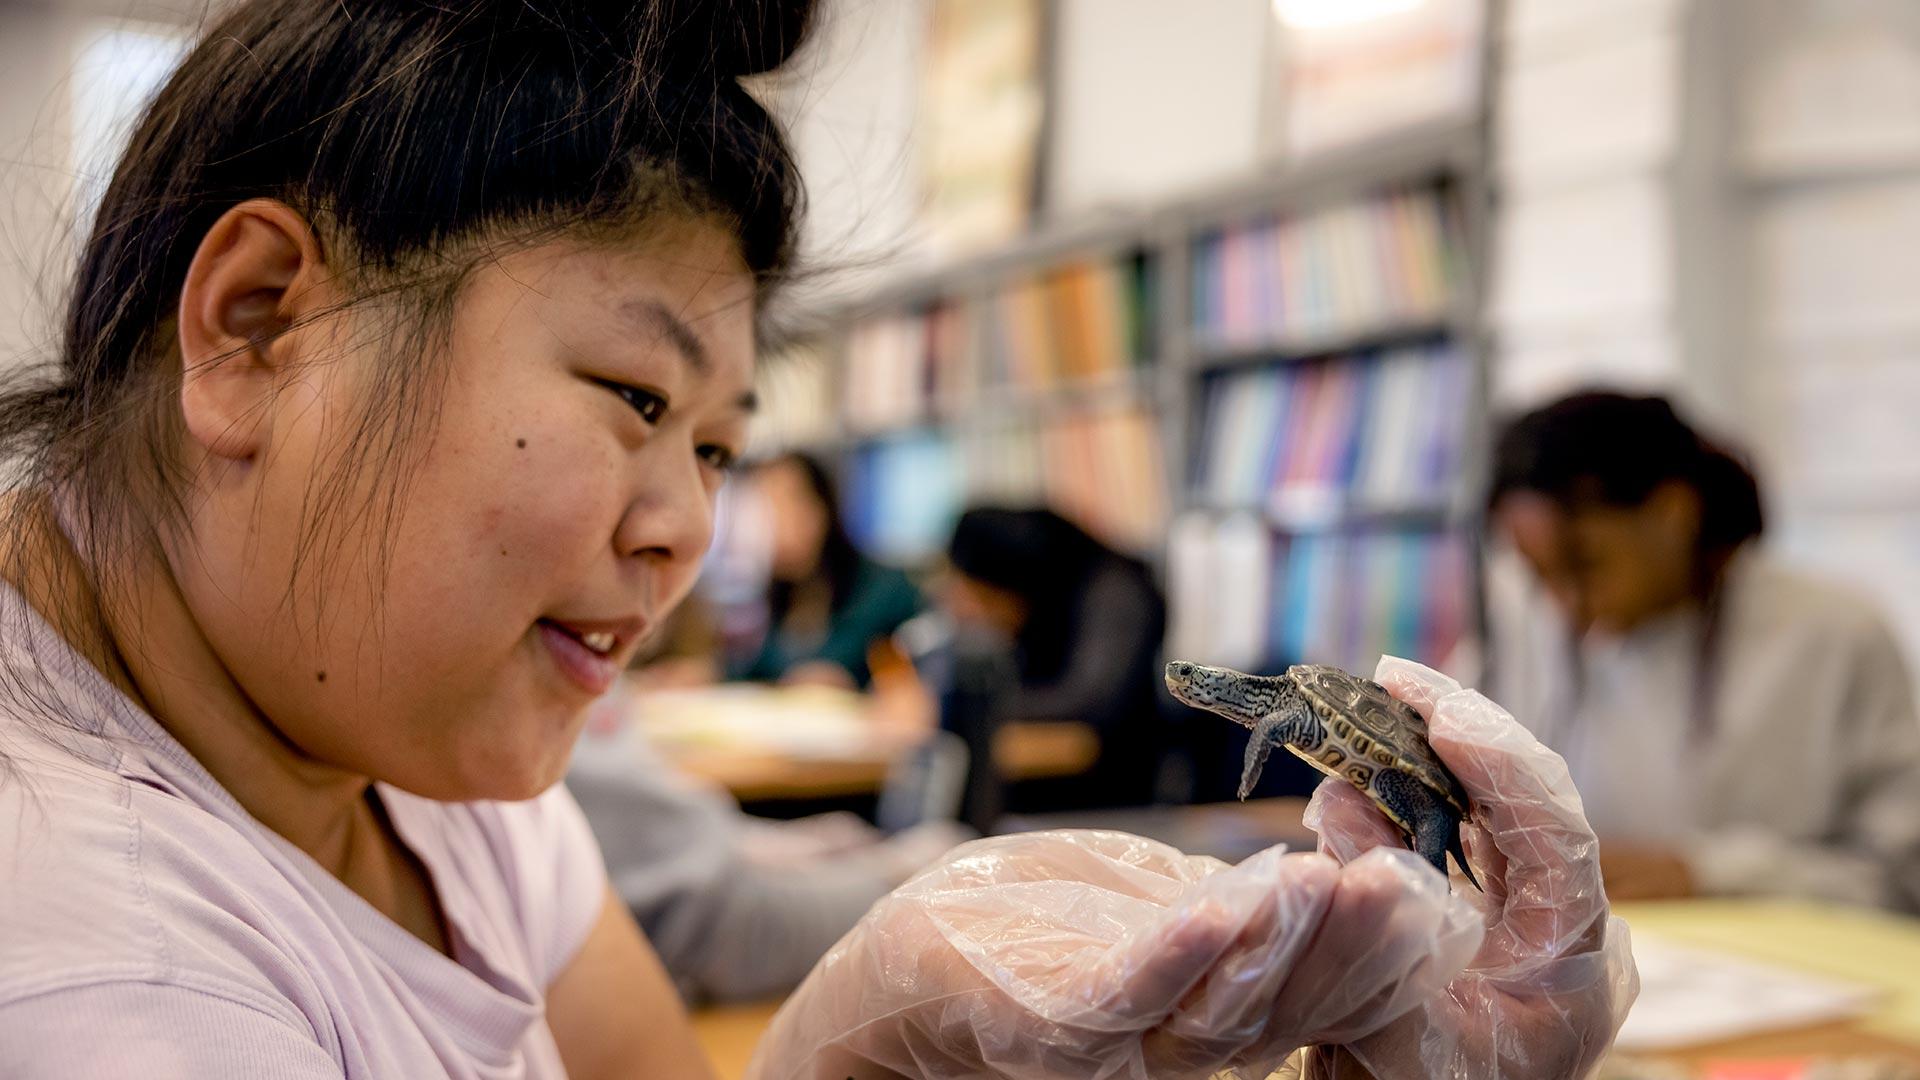 Elementary education major Lauren Taylor ’23 holds one of three baby terrapins being raised at the College of Education, where they’ll serve as teaching tools for the 2022-23 school year before being released back into the Chesapeake Bay in the summer. Photos by Stephanie S. Cordle.